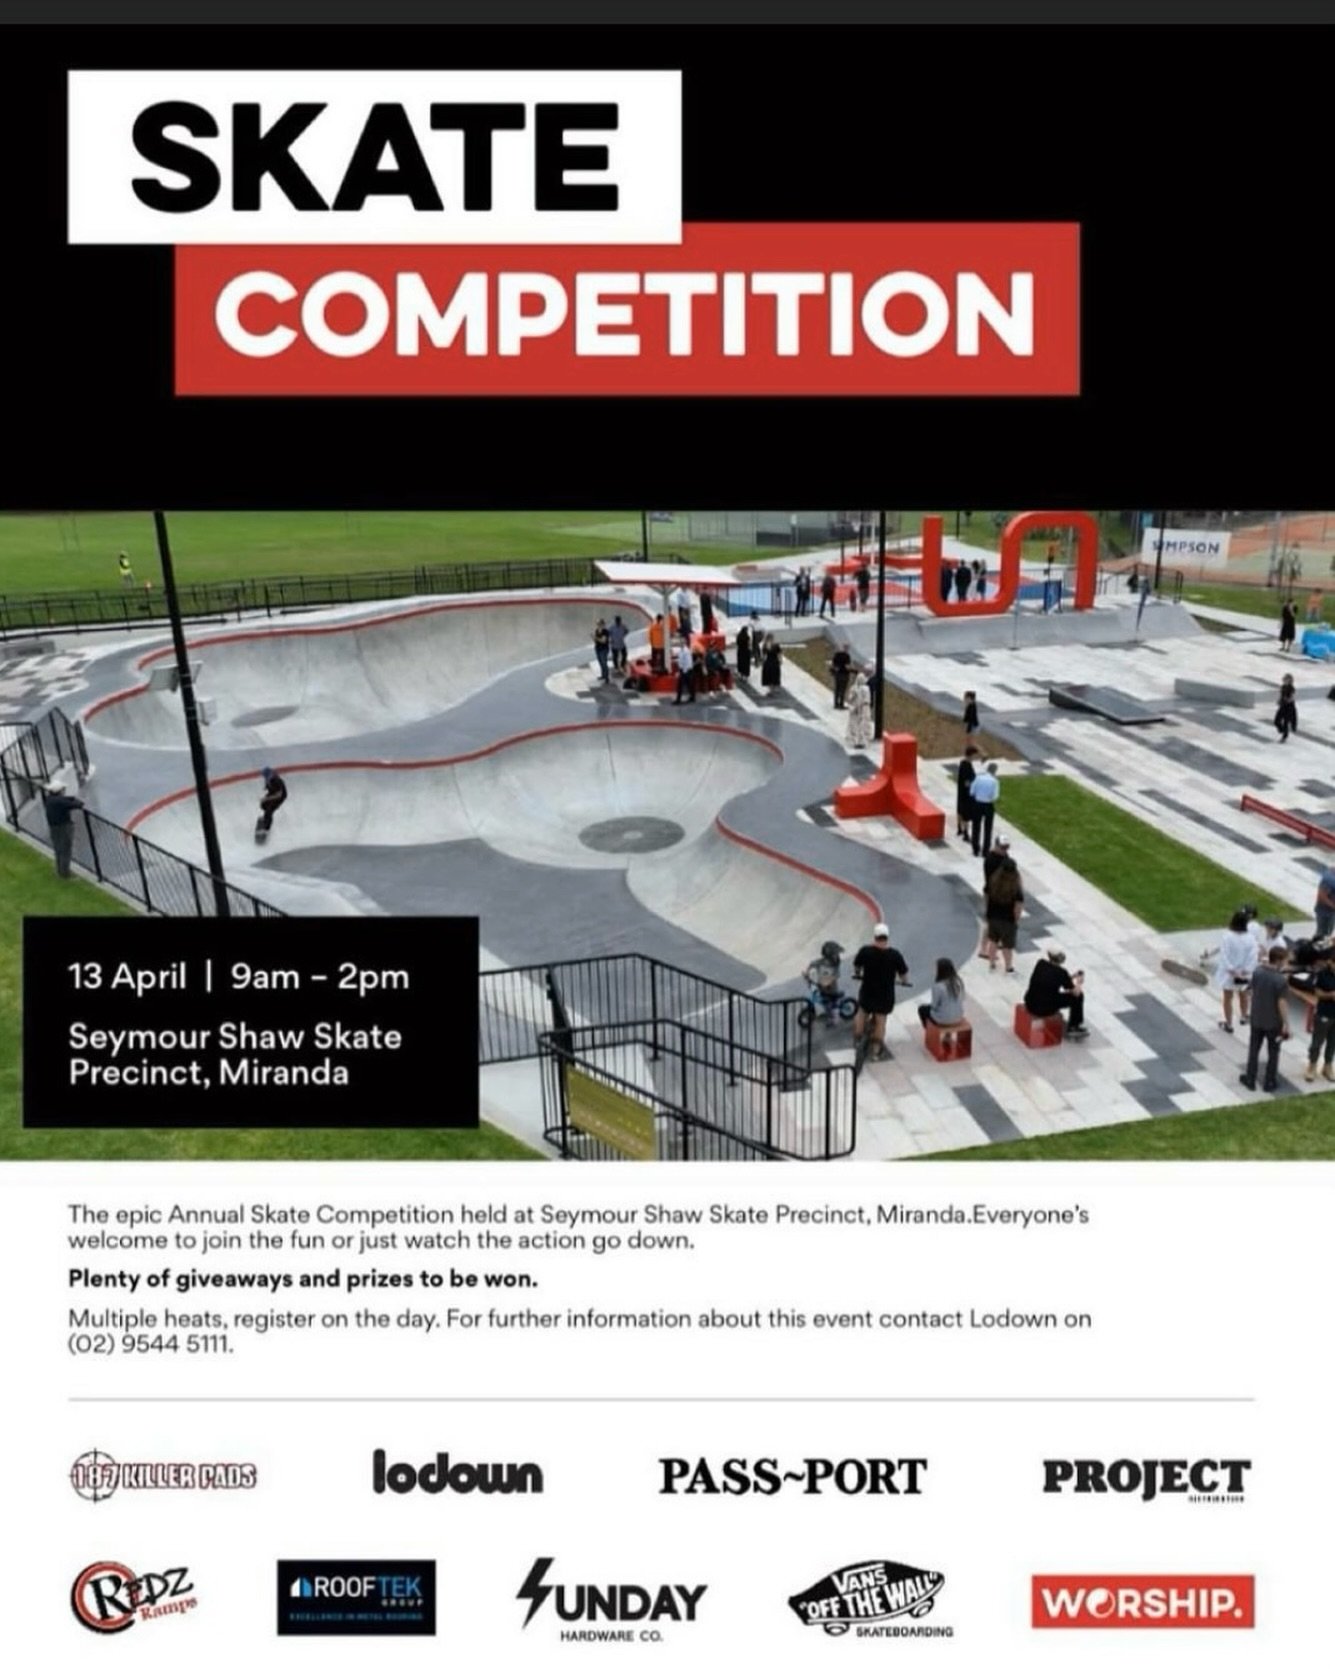 THIS SATURDAY! Get yourself to Seymour Shaw Skatepark if you like skate comps!!! Sure to be some amazing skating go down. Watch or skate? You&rsquo;ll probably have a good time either way 👍